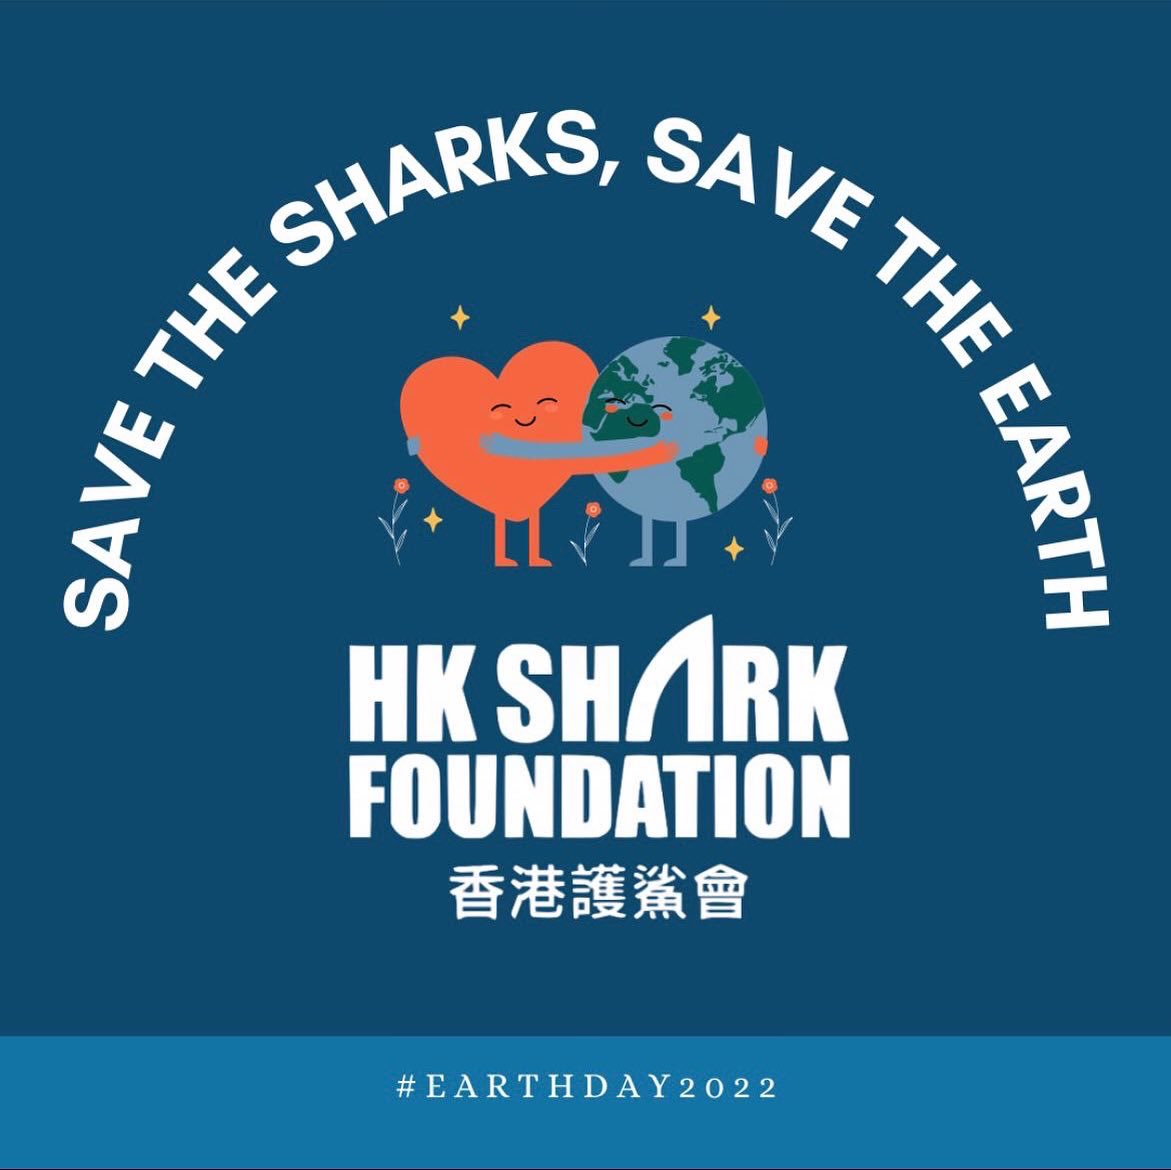 Happy Earth Day 🌎 2022!  Our success at HKSF depends on our amazing #volunteers like  Michelle and Andrew to create meaningful content to help raise awareness for sharks on #earthday2022.  
#hongkongsharkfoundation #saynotosharkfinsoup #oceans #earthday #earthdayeveryday